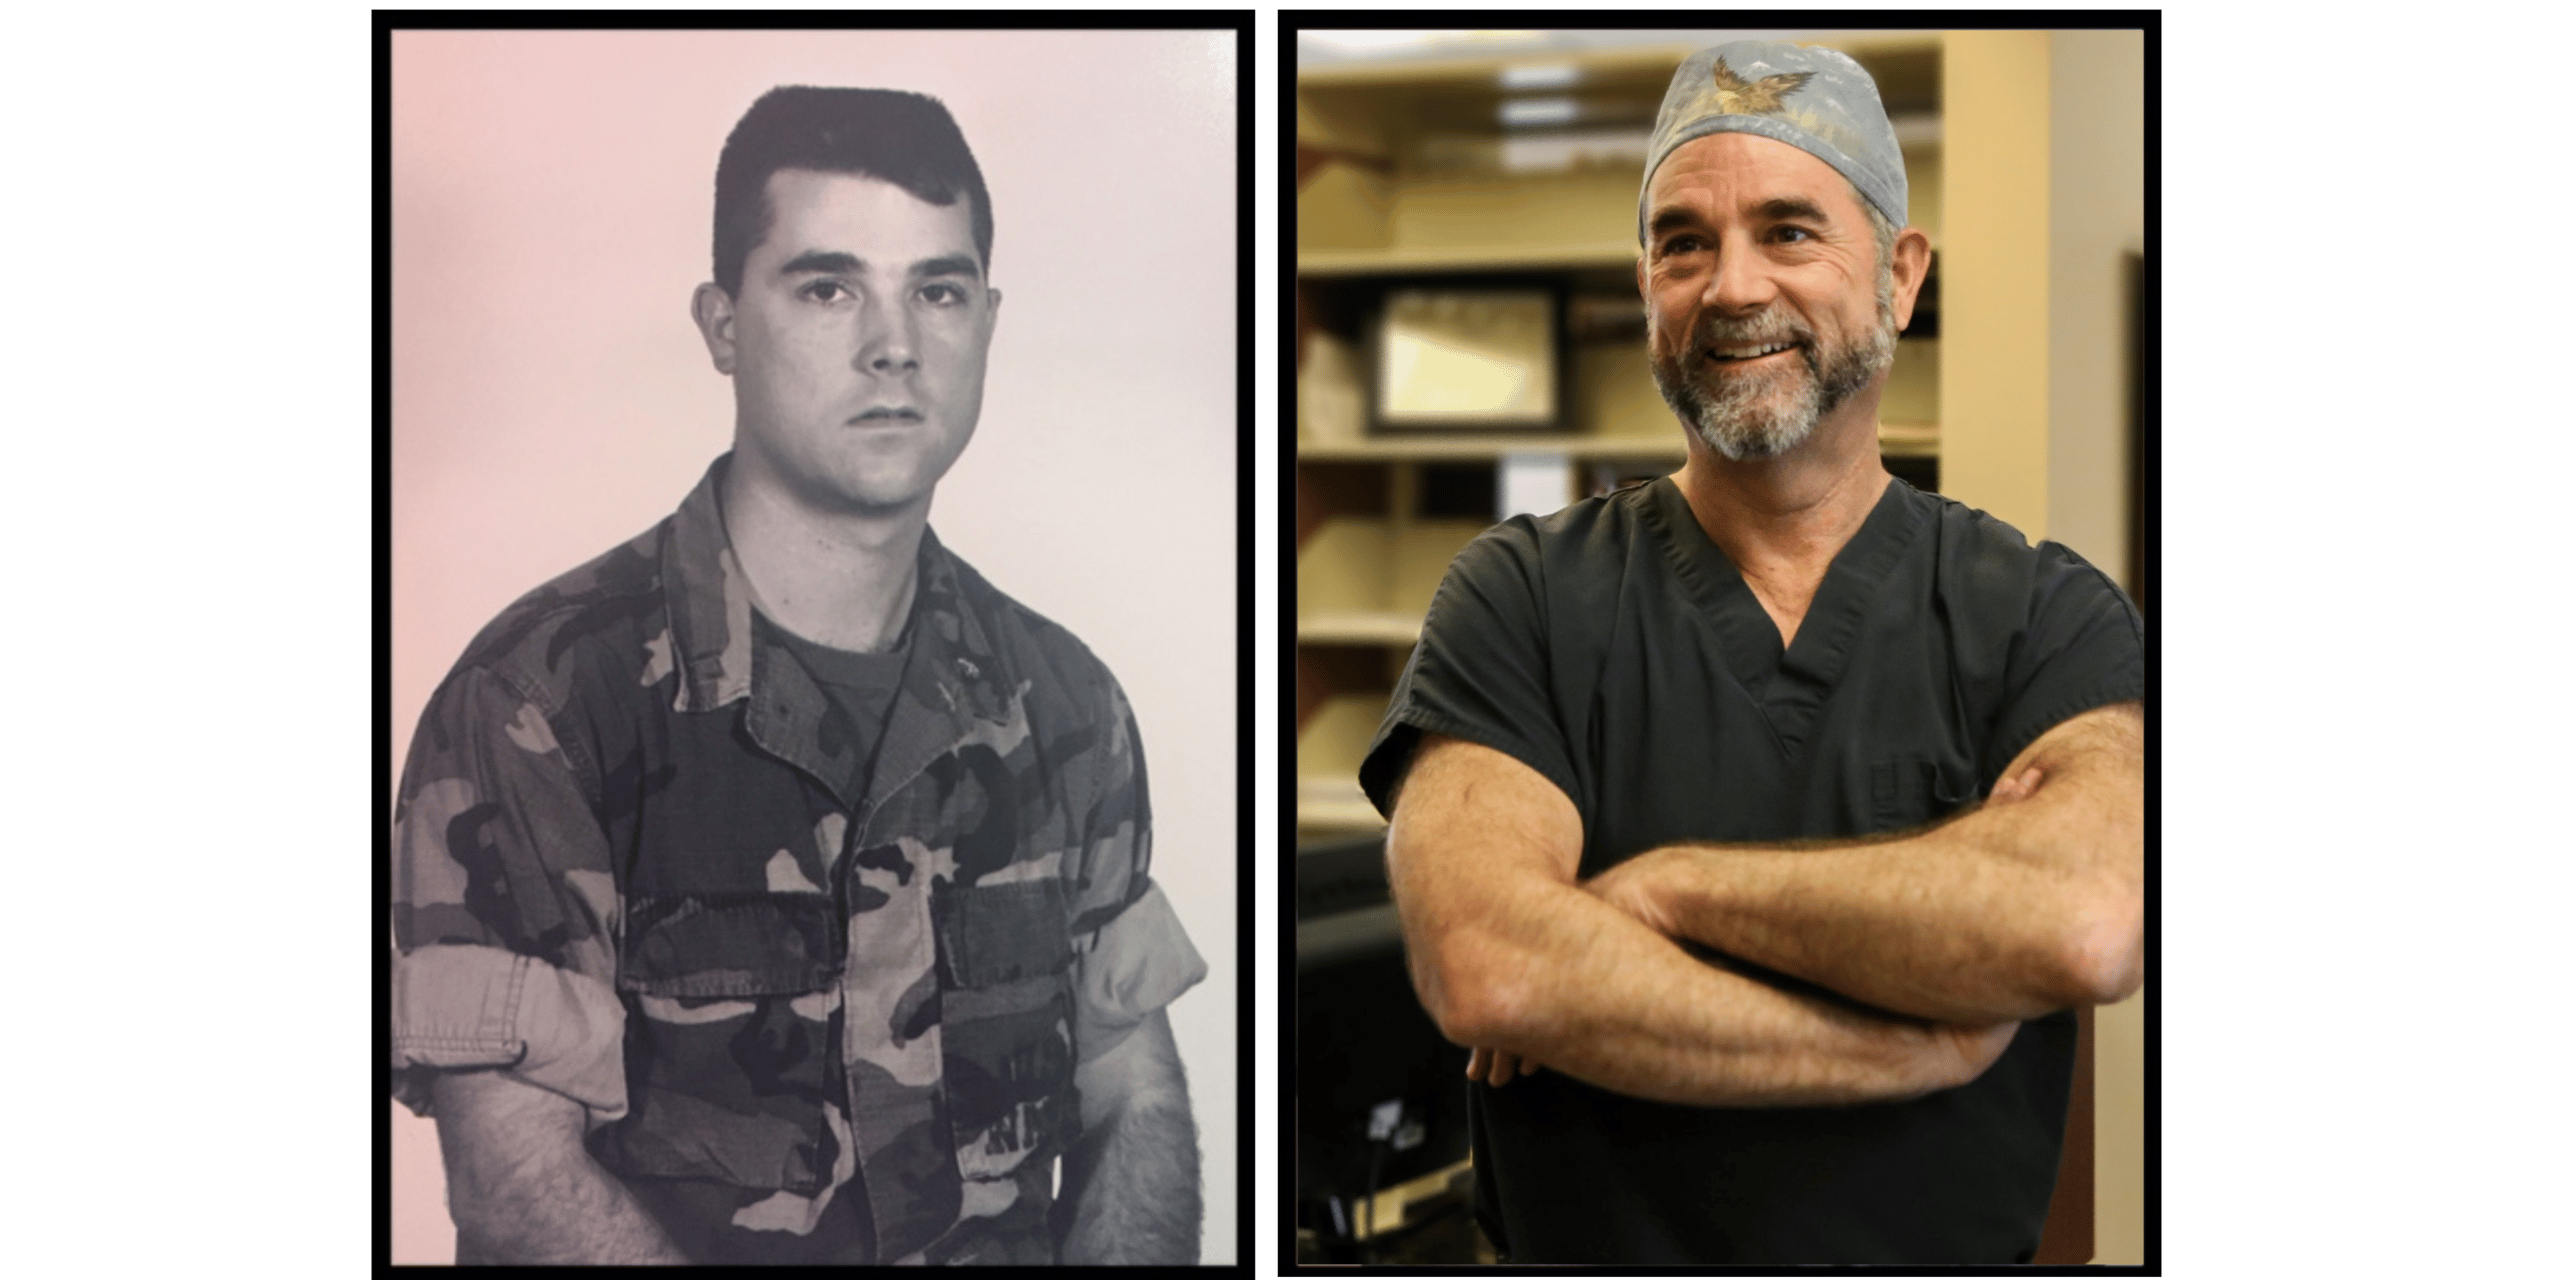 Side by side image of Dr. Blanton in the Navy and present day